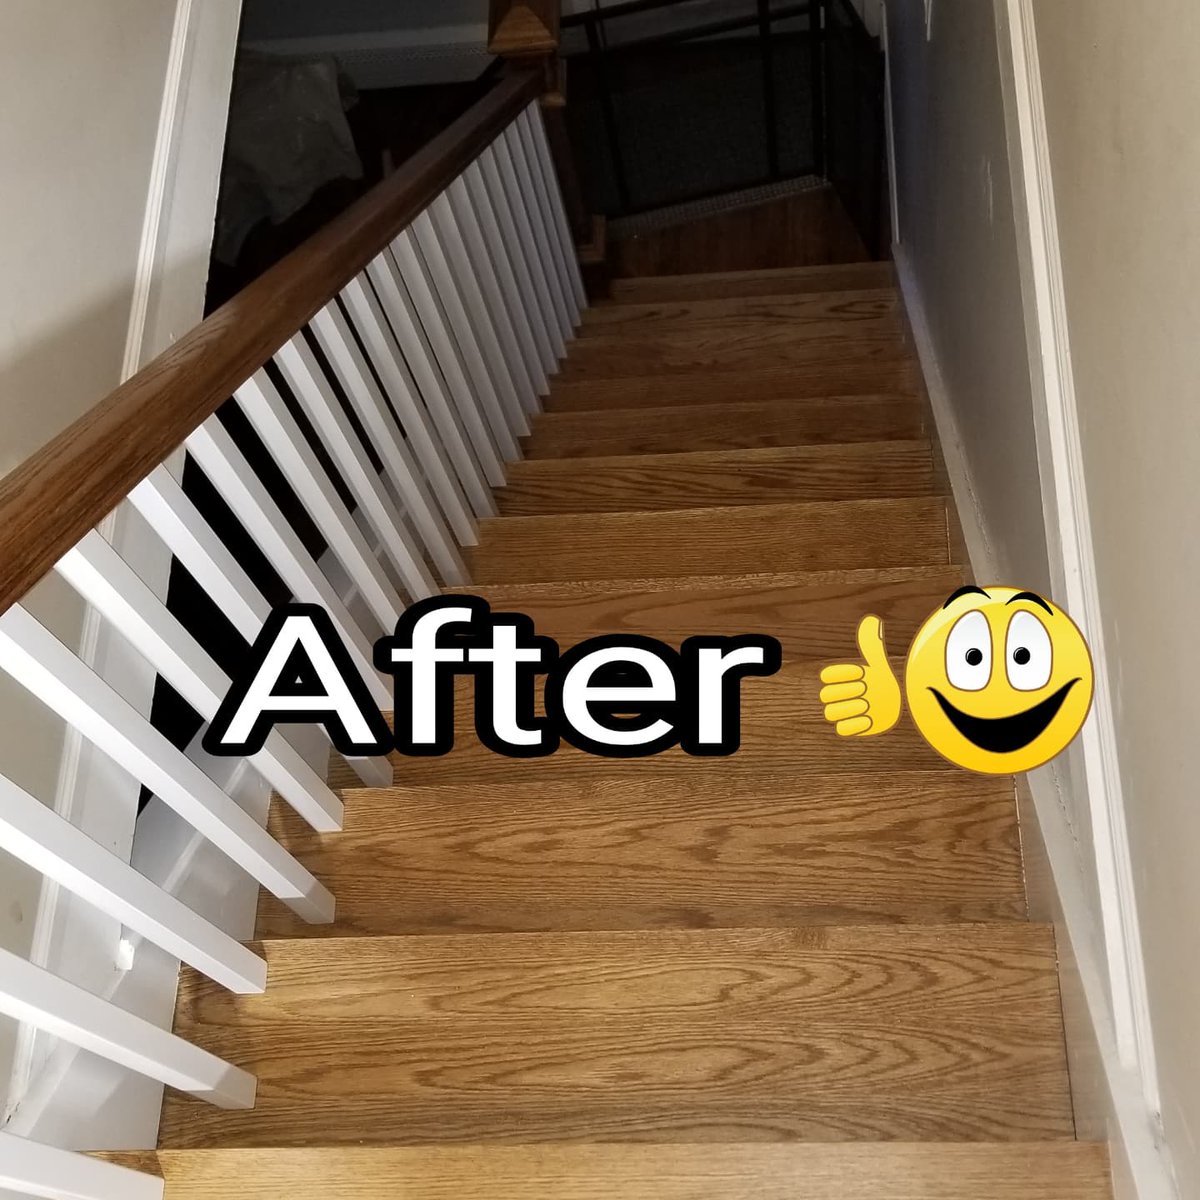 My client loves it, what do you think? 👌

#staircase #staircasedesign #staircaserailing #staircaserenovation #staircasedecor